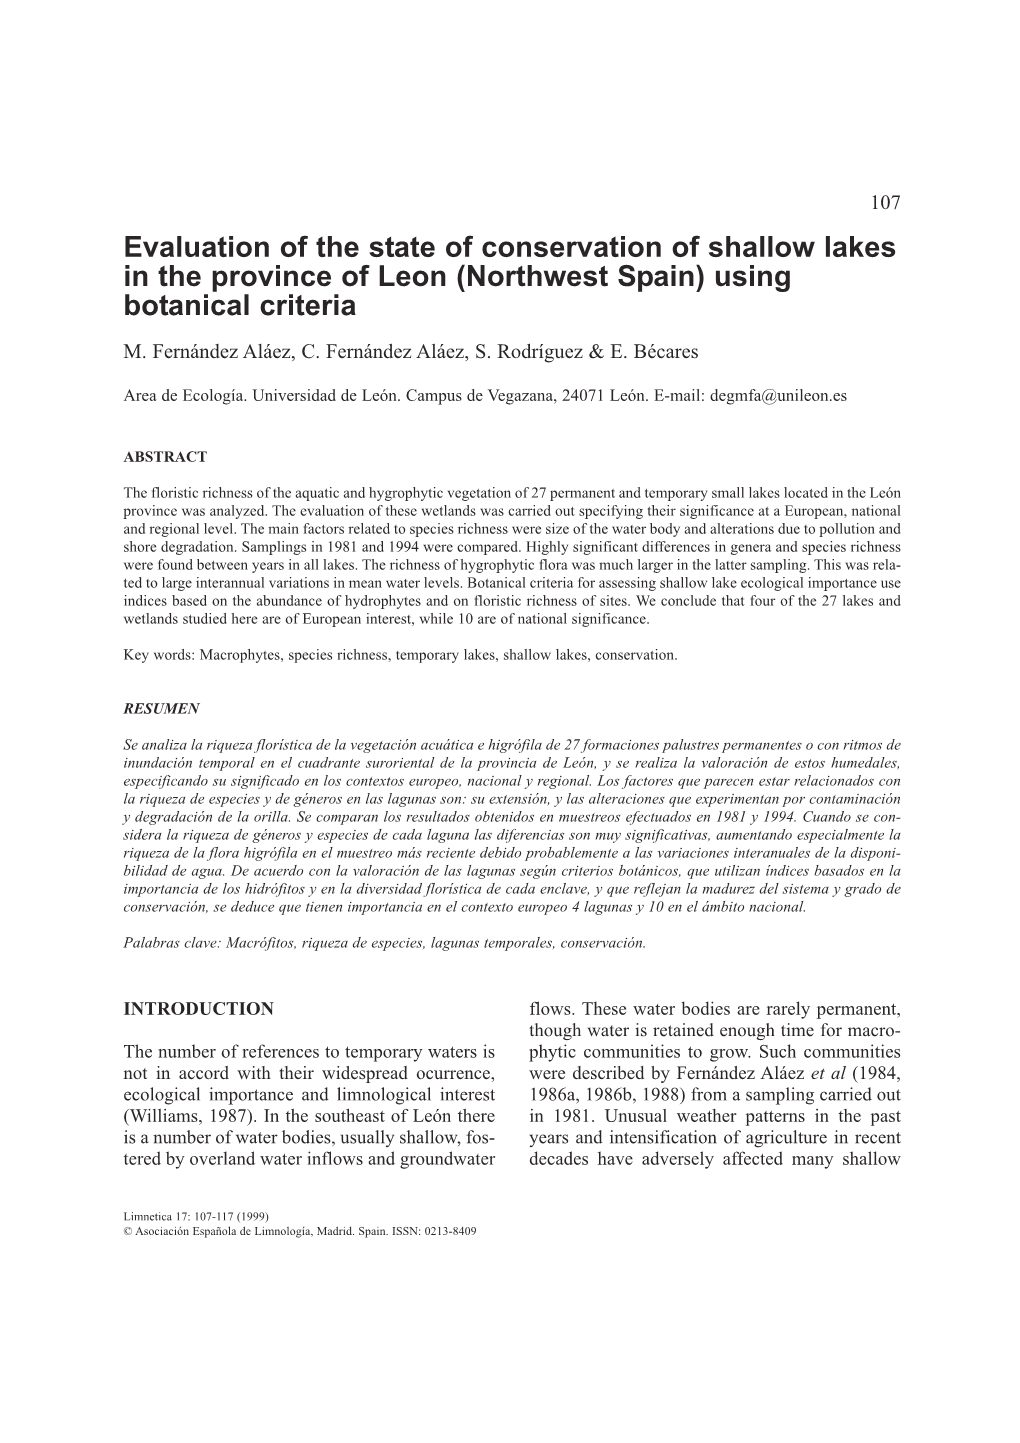 Evaluation of the State of Conservation of Shallow Lakes in the Province of Leon (Northwest Spain) Using Botanical Criteria